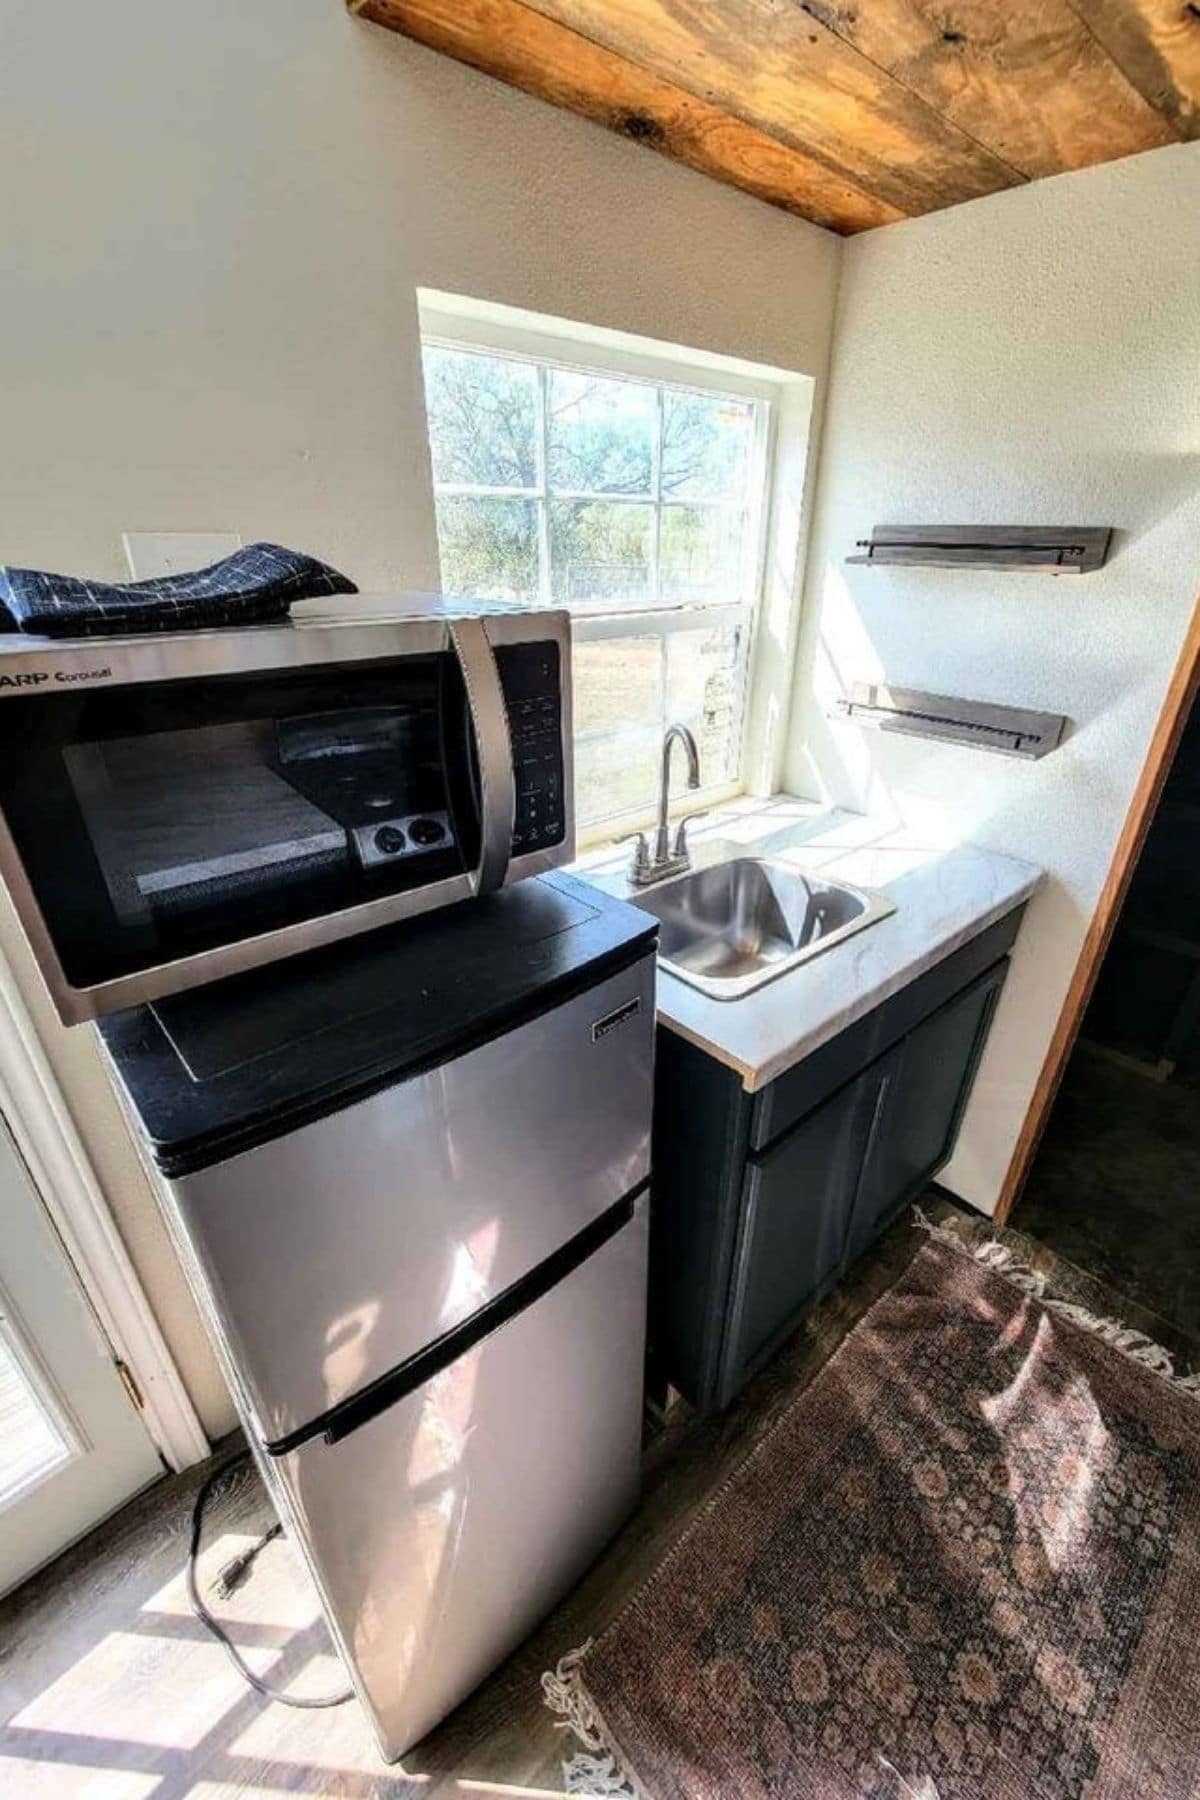 Stainless steel refrigerator with microwave on top next to blue cabinets with white counters and sink